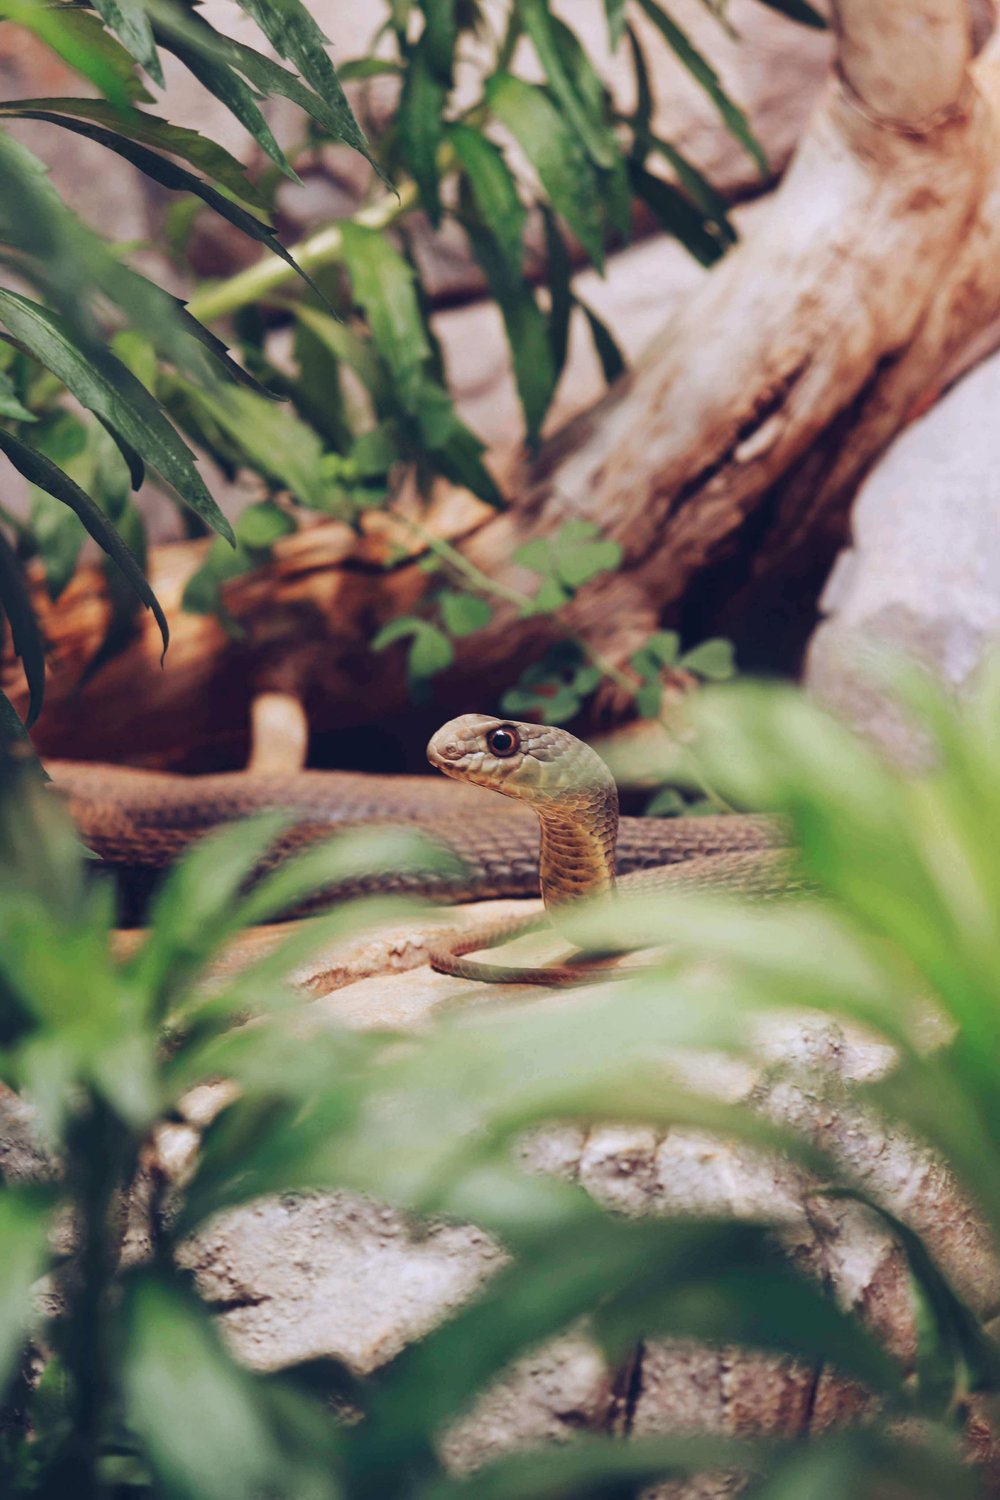 Snake Dream Symbolism: 6 Reasons You're Dreaming of Snakes